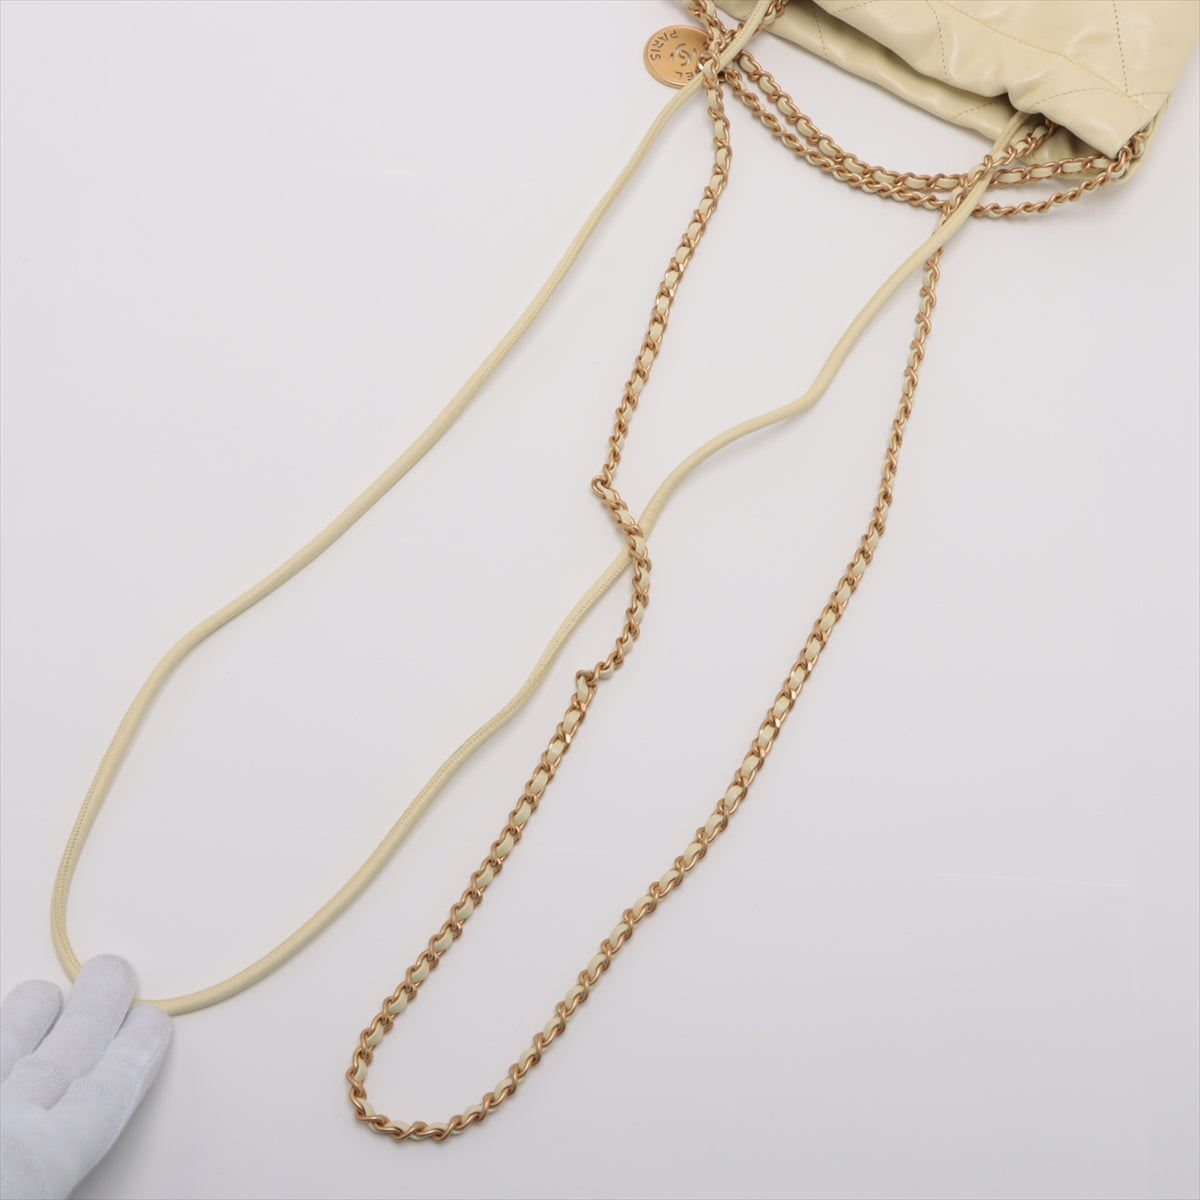 Chanel Chanel 22 mini Leather Chain shoulder bag Yellow Gold Metal fittings